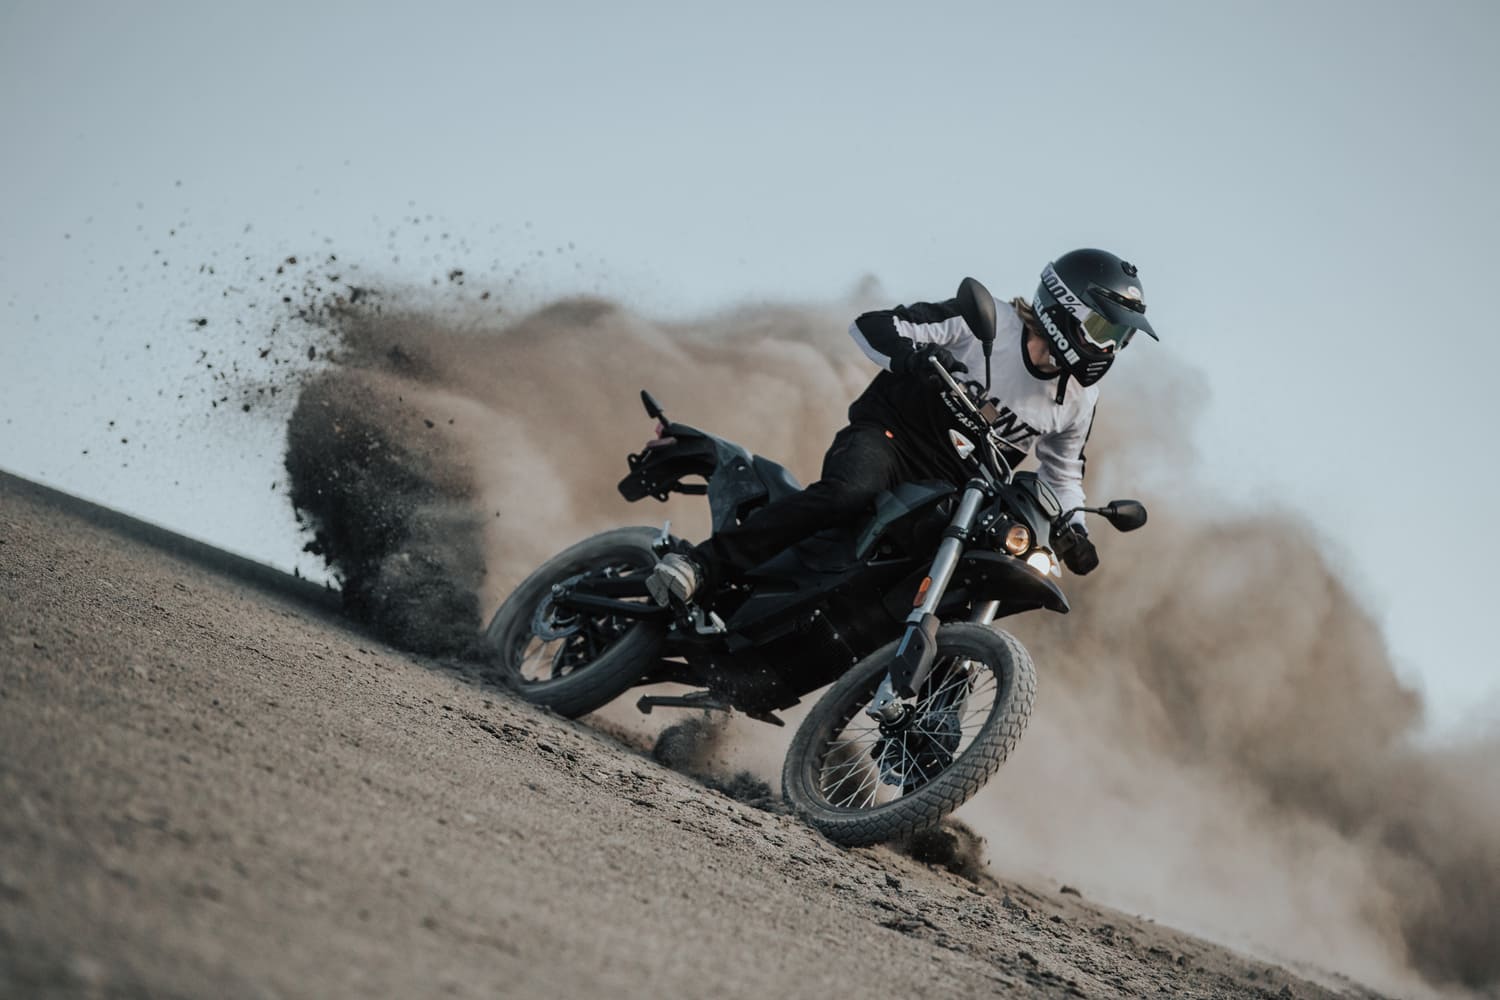 man riding a motorcycle in the sand and wearing moto gear